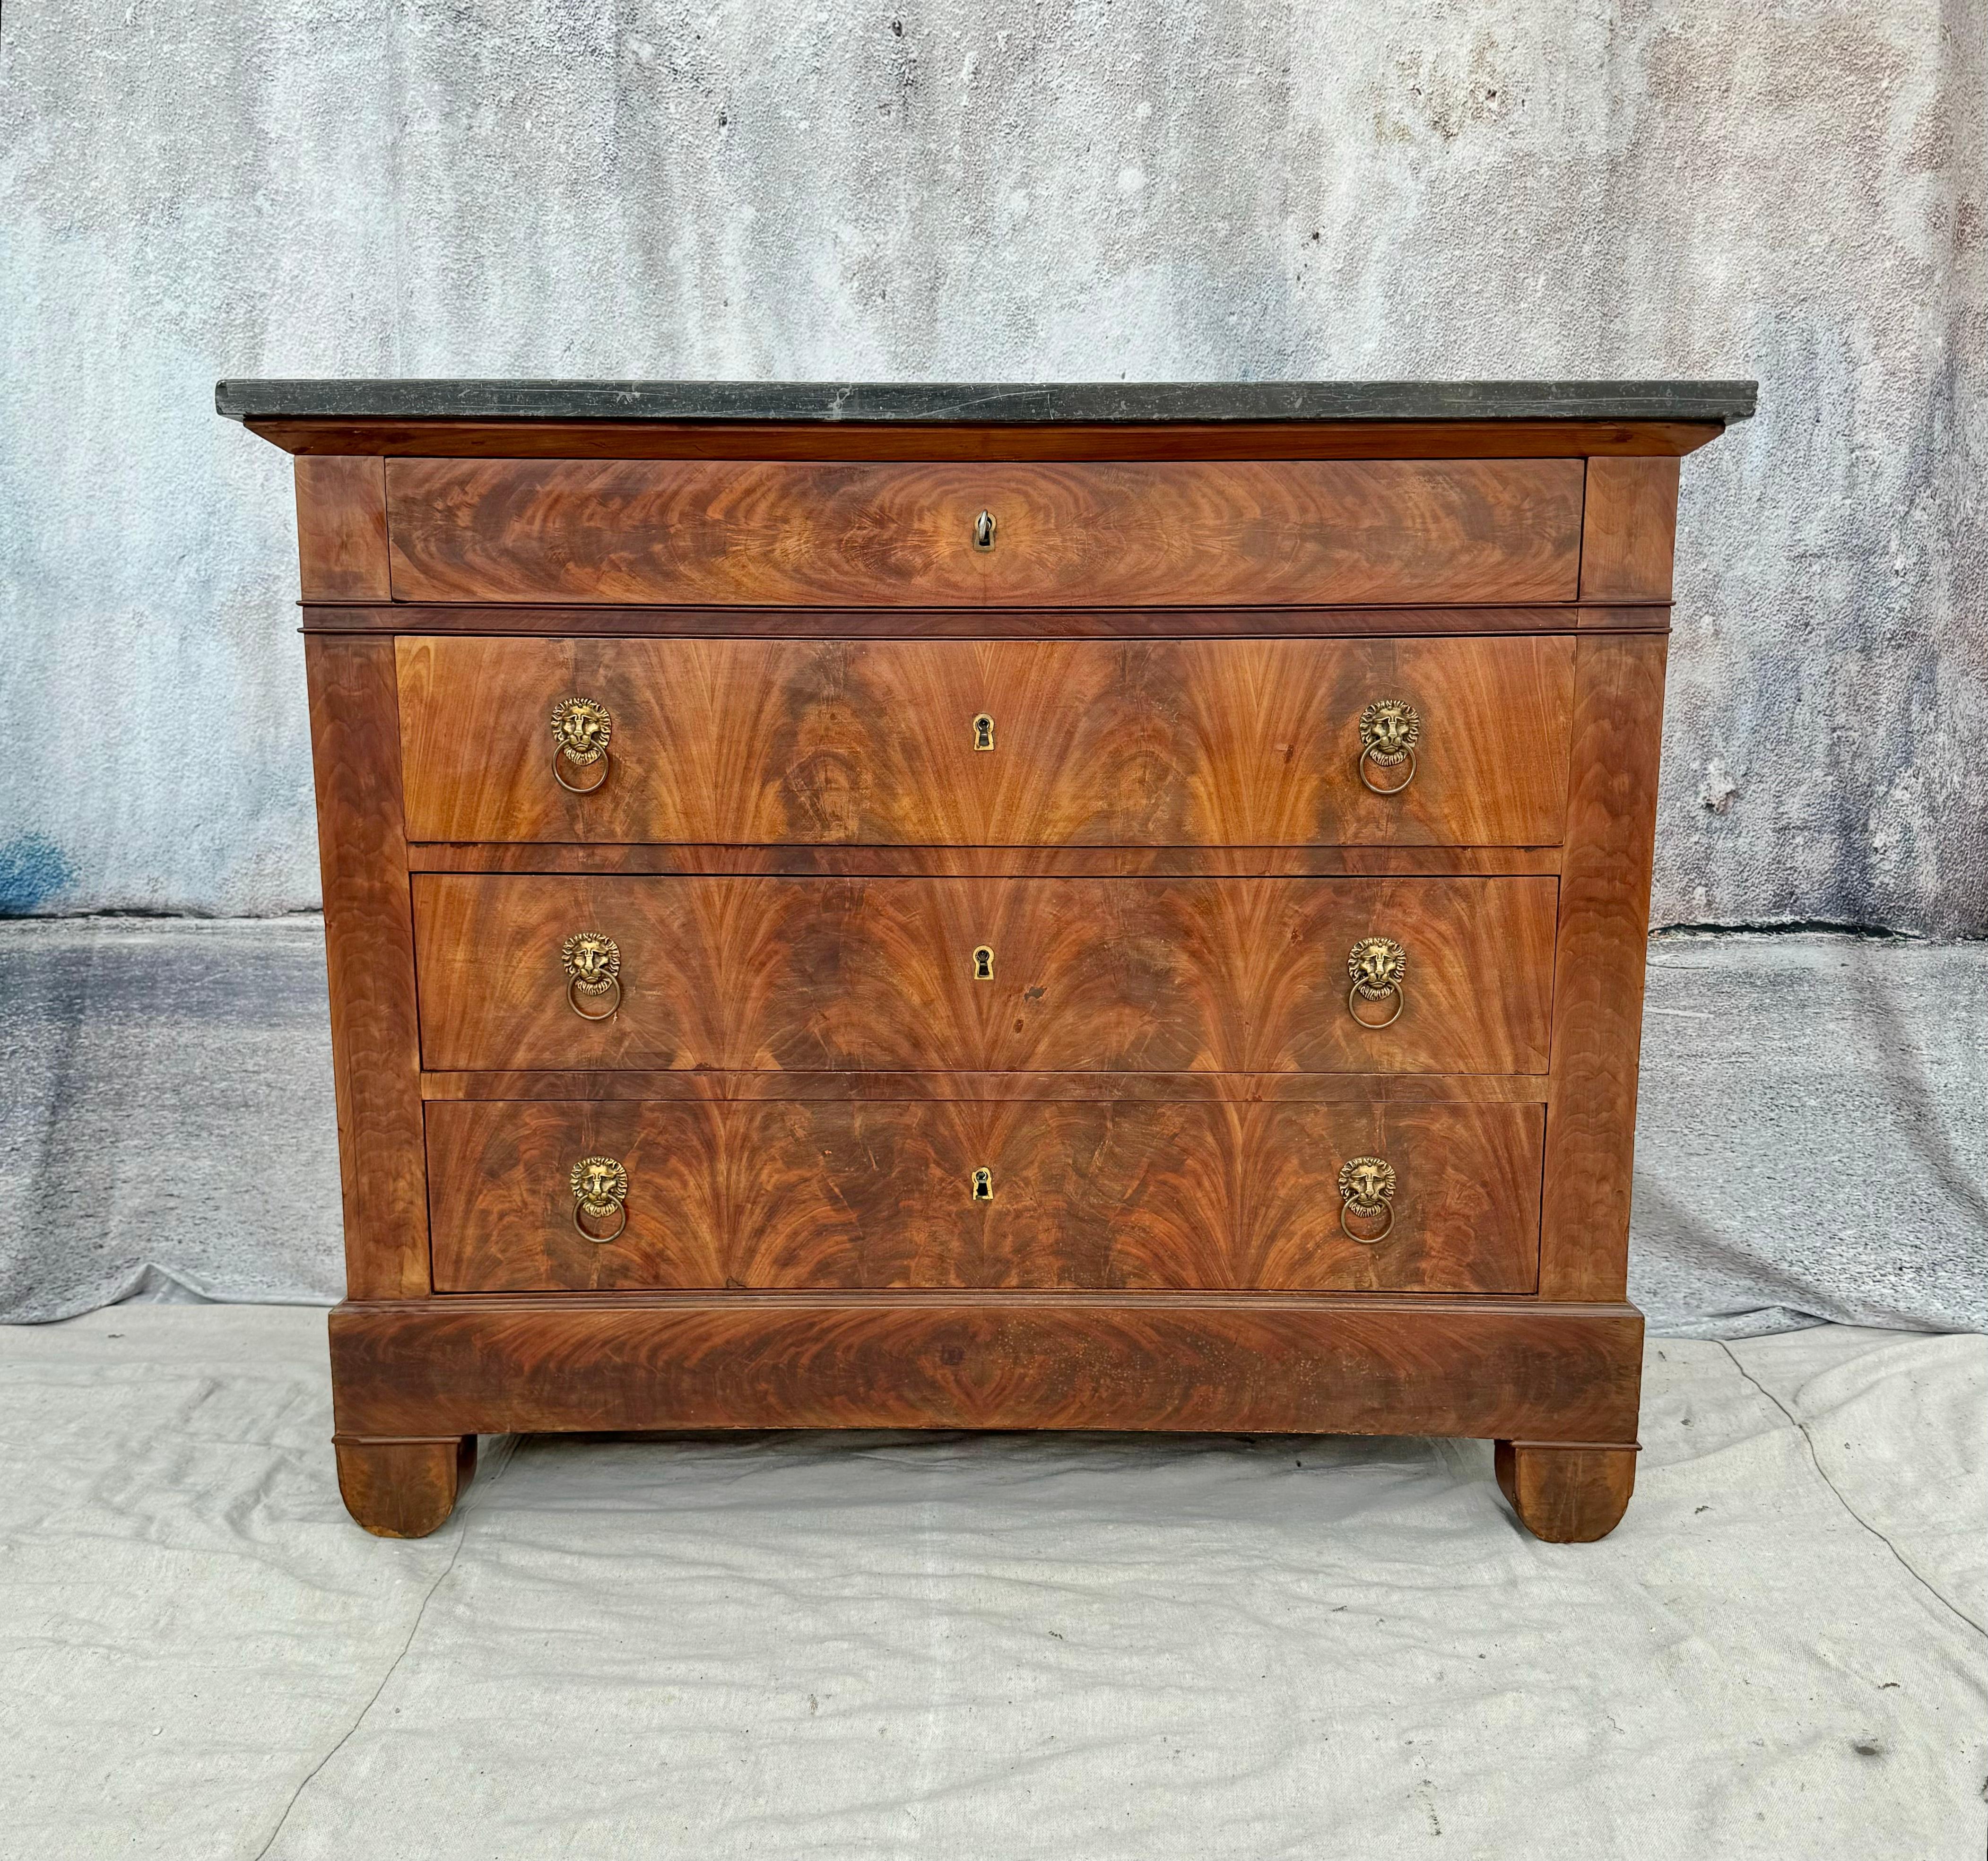 French Empire period marble-top walnut commode, mid 19th century. Commode features brass hardware with lions head handles on four drawers offering ample storage. The strong bold lines and subtle curves of the Empire pieces mix well with other styles